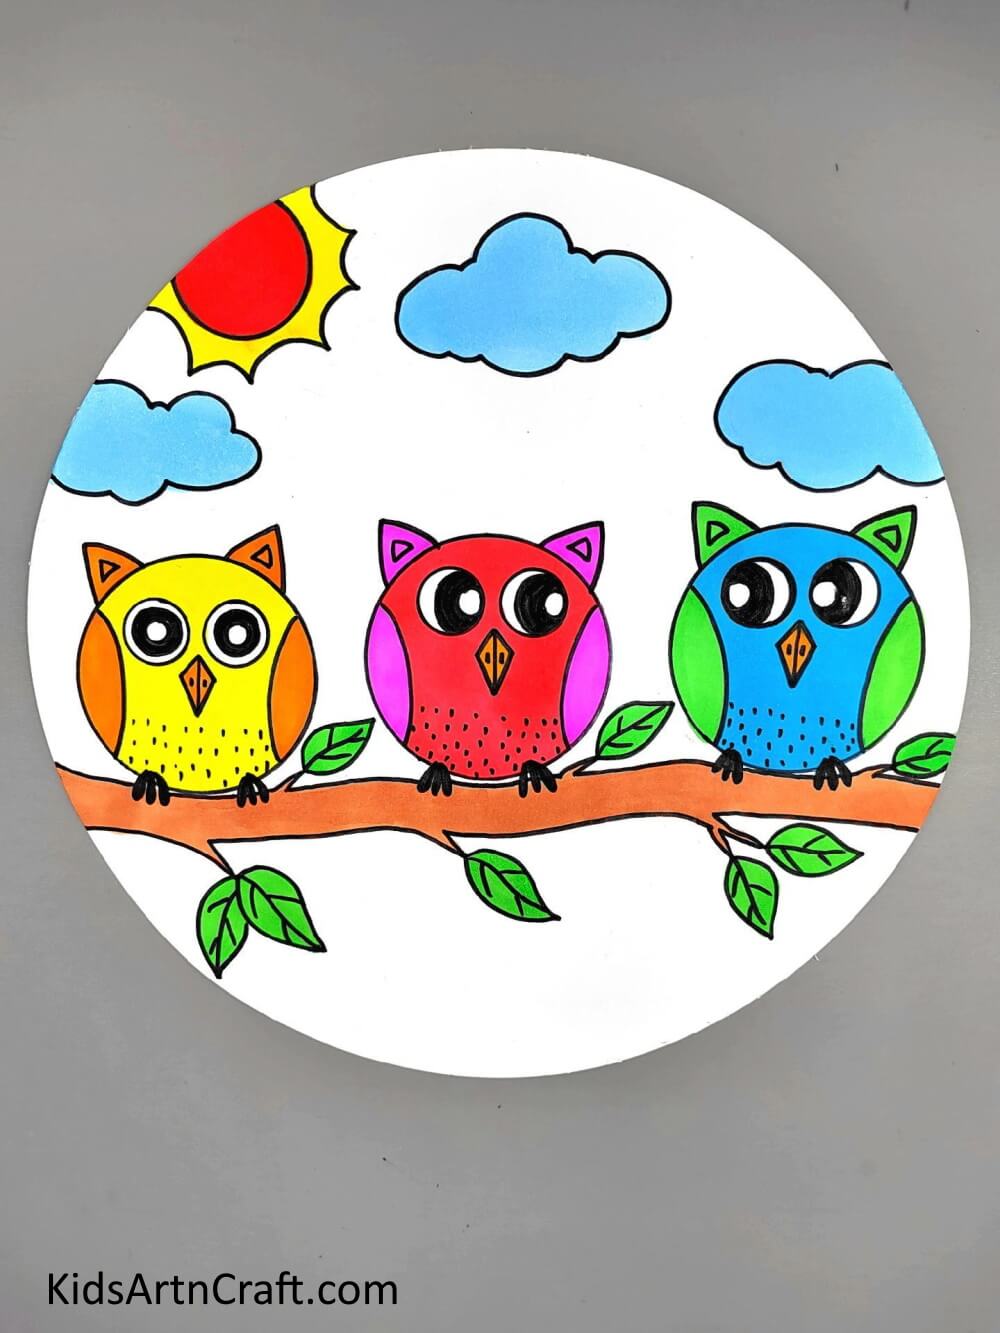 Adorable Group Of Owls Drawing Artistry For Children